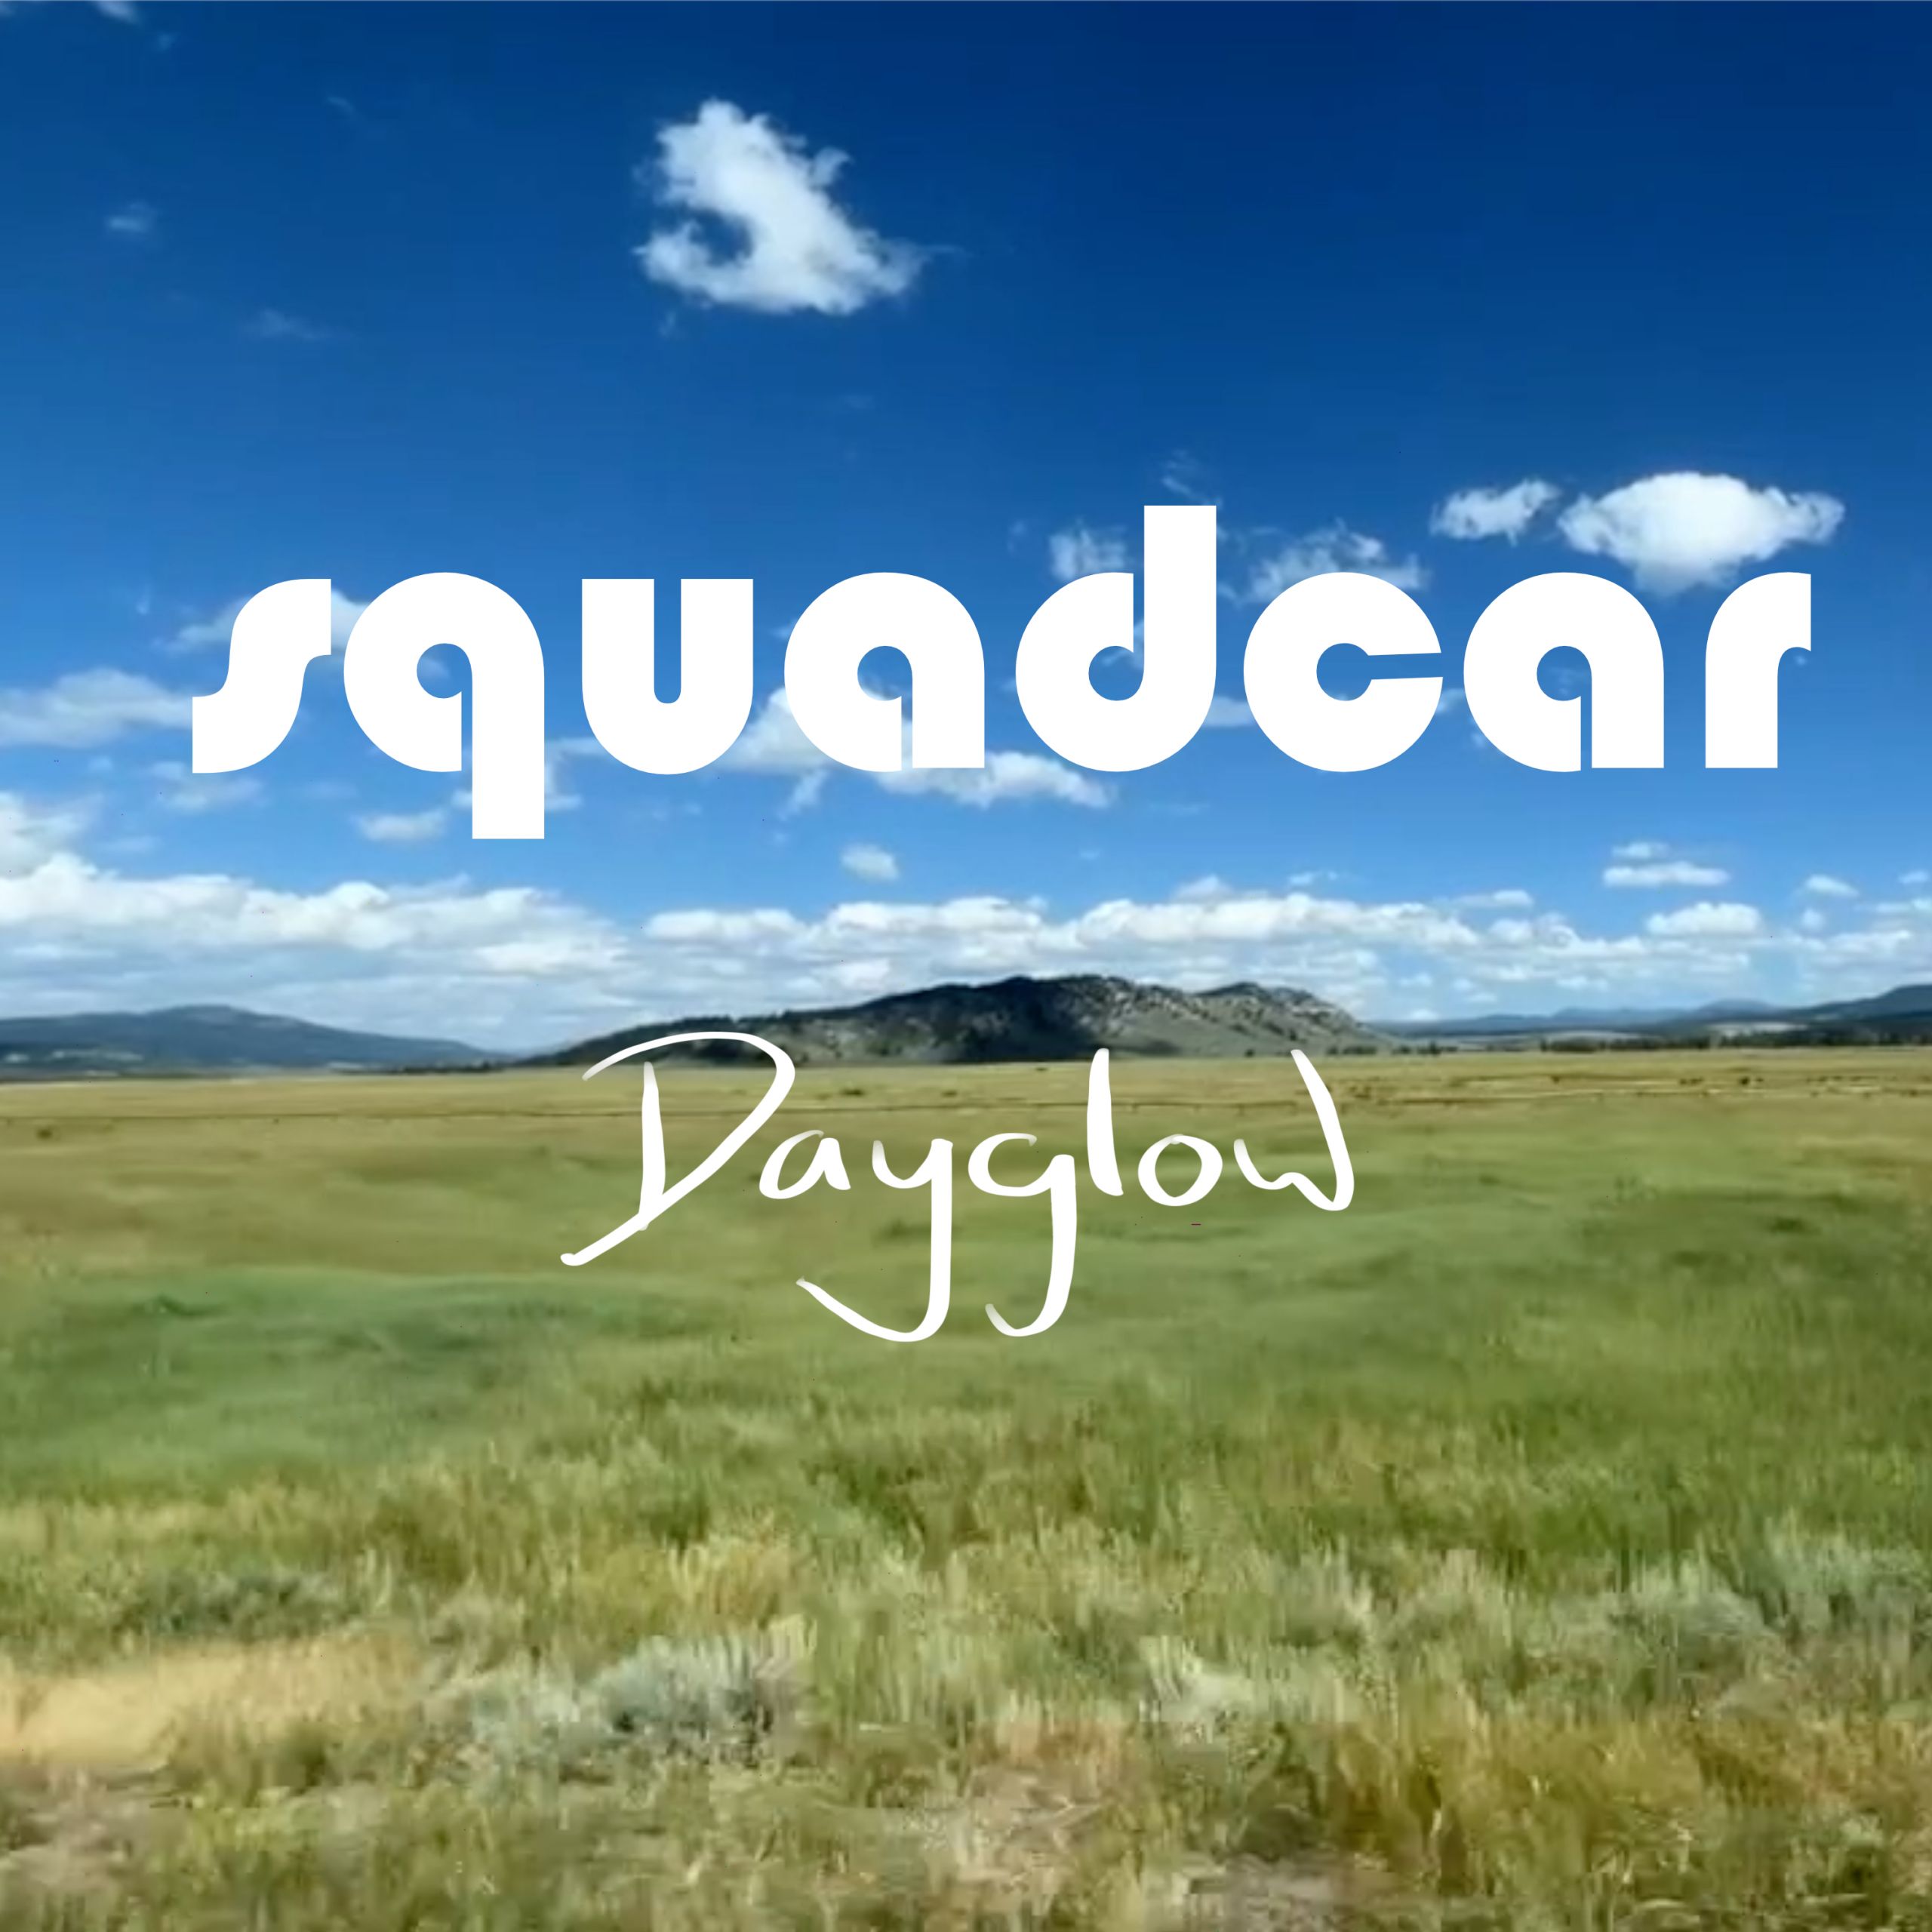 Squadcar release “Dayglow”